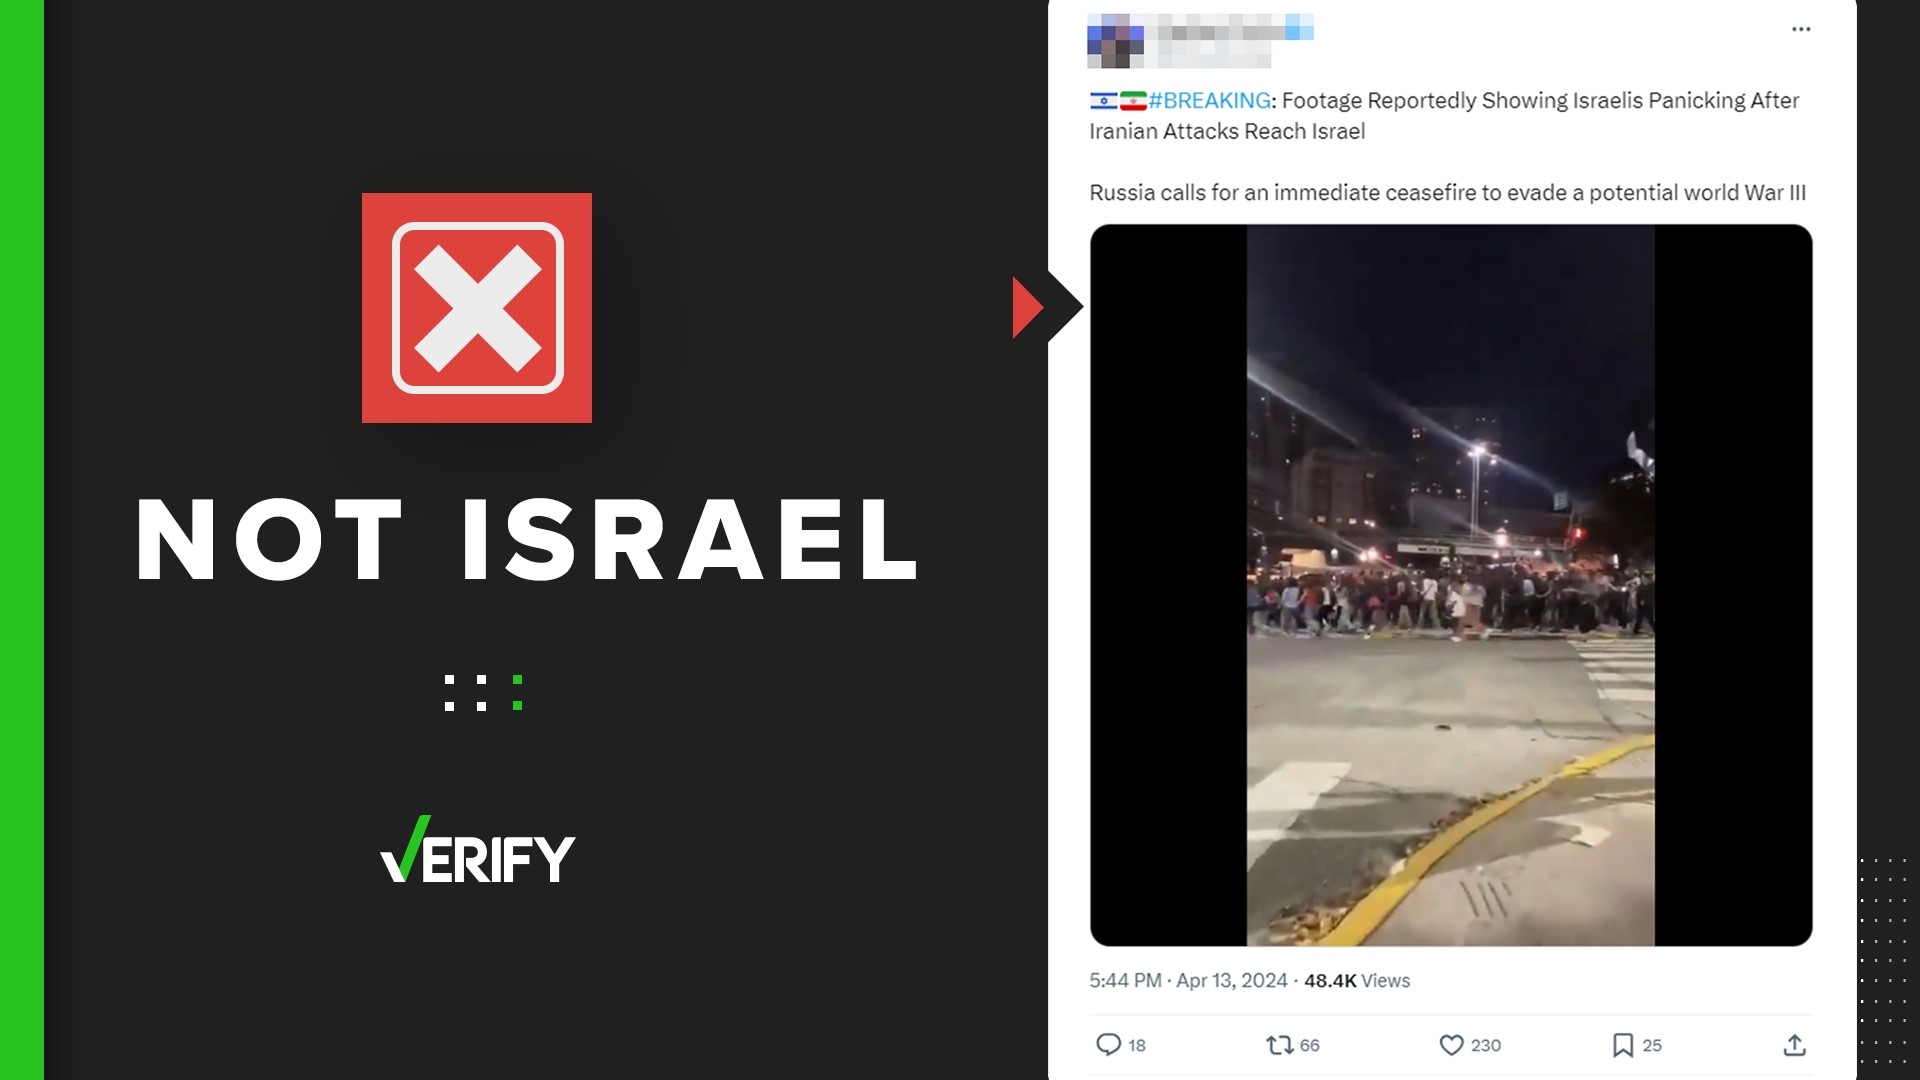 A video showing a crowd running through the streets wasn’t taken in Israel during Iran’s April 13 drone strikes. It was taken in Buenos Aires, Argentina.